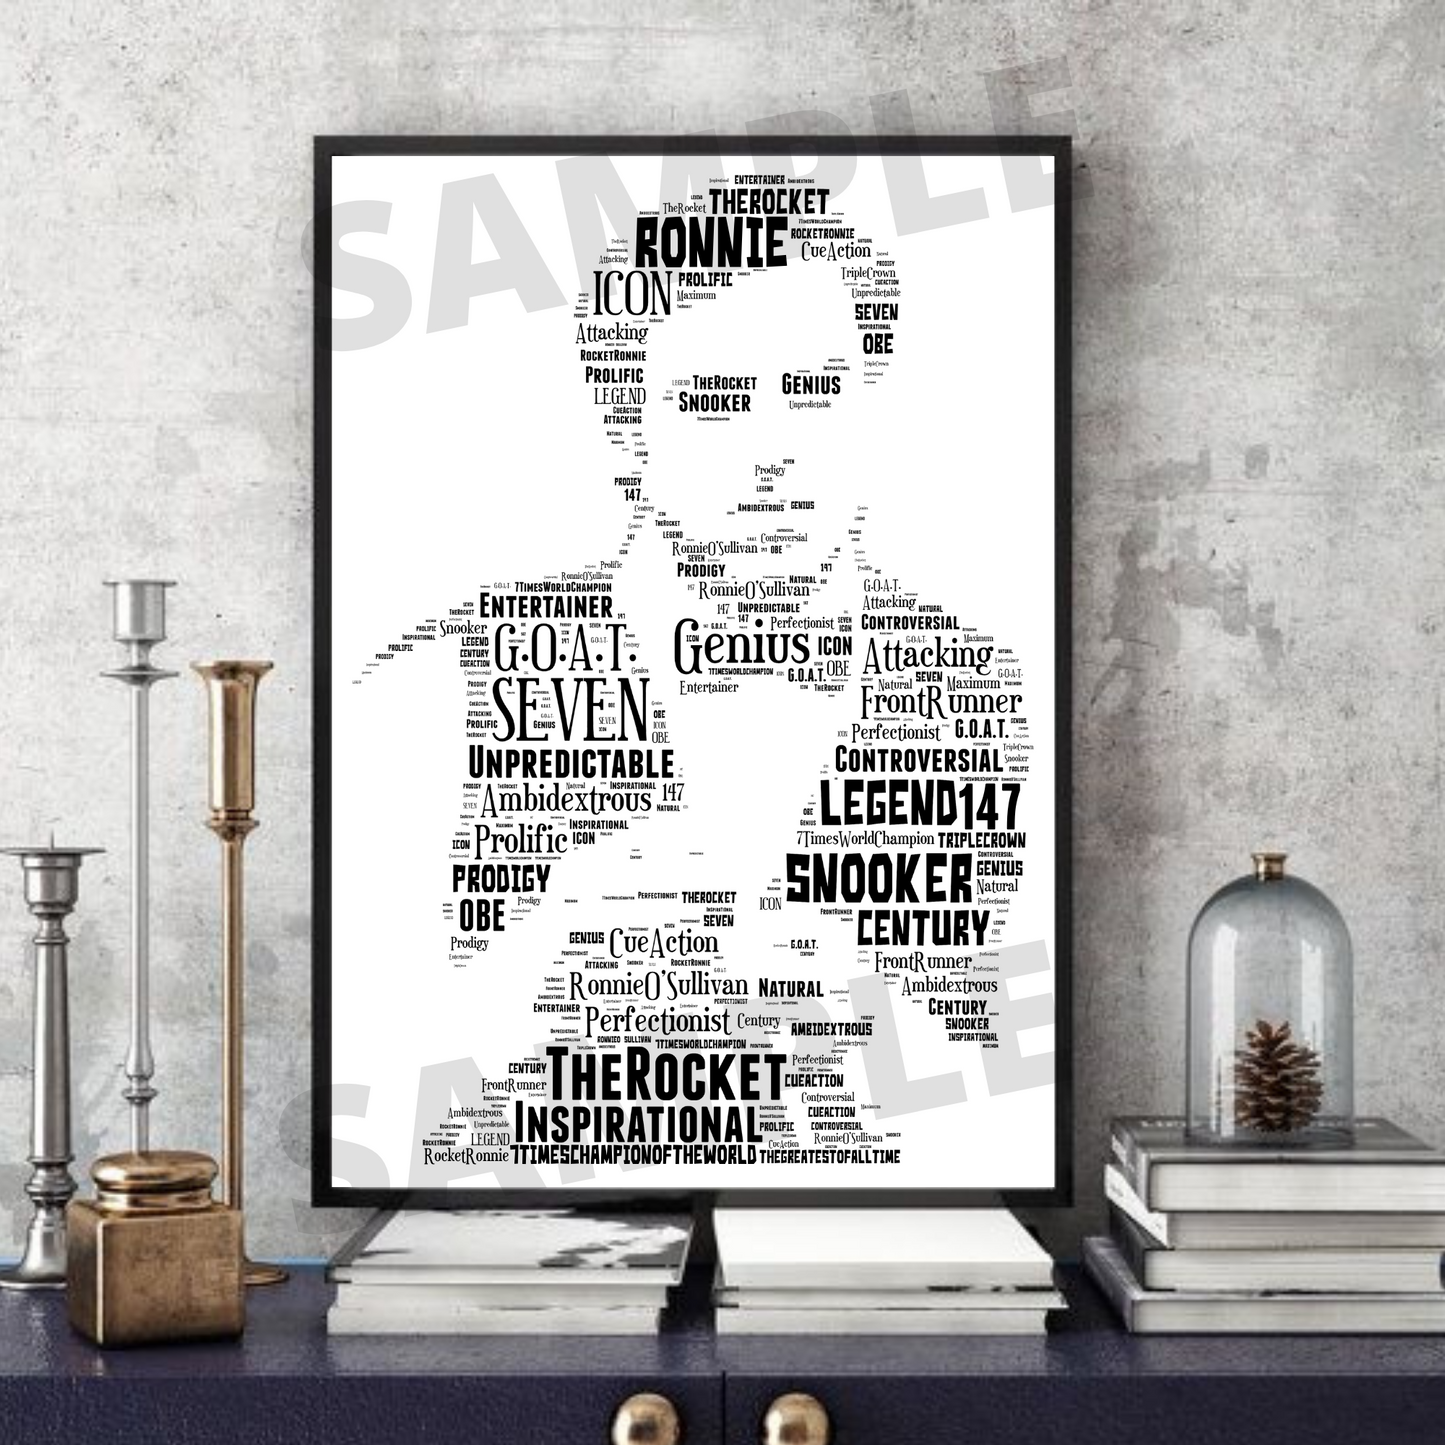 Ronnie O'Sullivan Rocket Ronnie Snooker 7 times Typography Portrait Word Art Memorabilia/collectable/gift